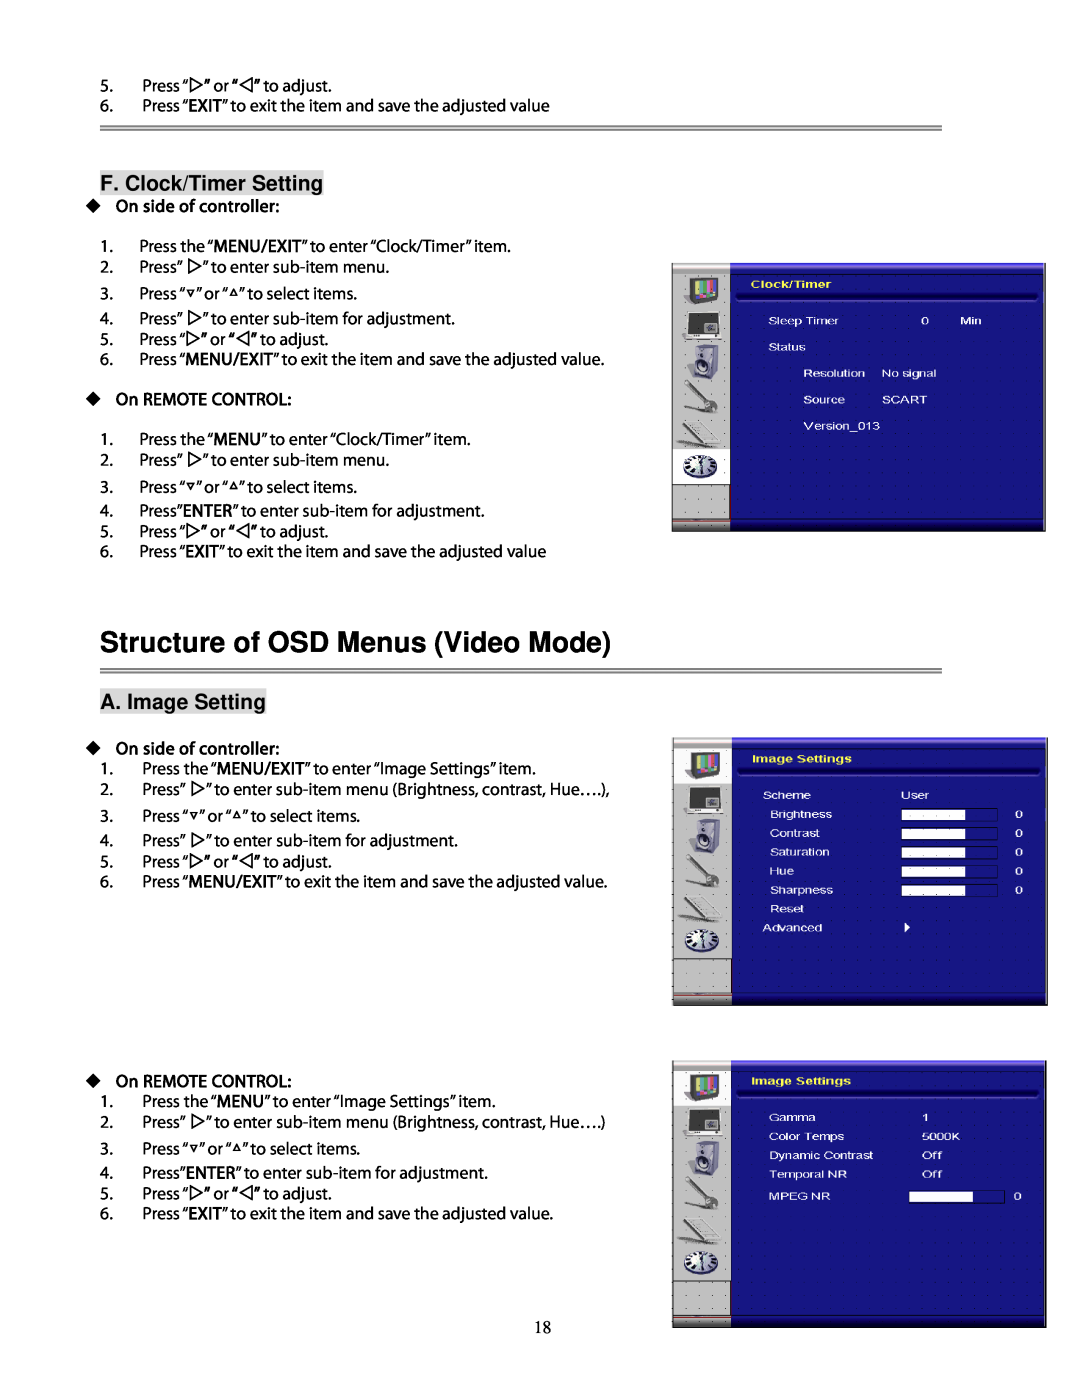 Planar 420, 520, pd 370 Structure of OSD Menus Video Mode, F. Clock/Timer Setting, A. Image Setting, ‹On side of controller 